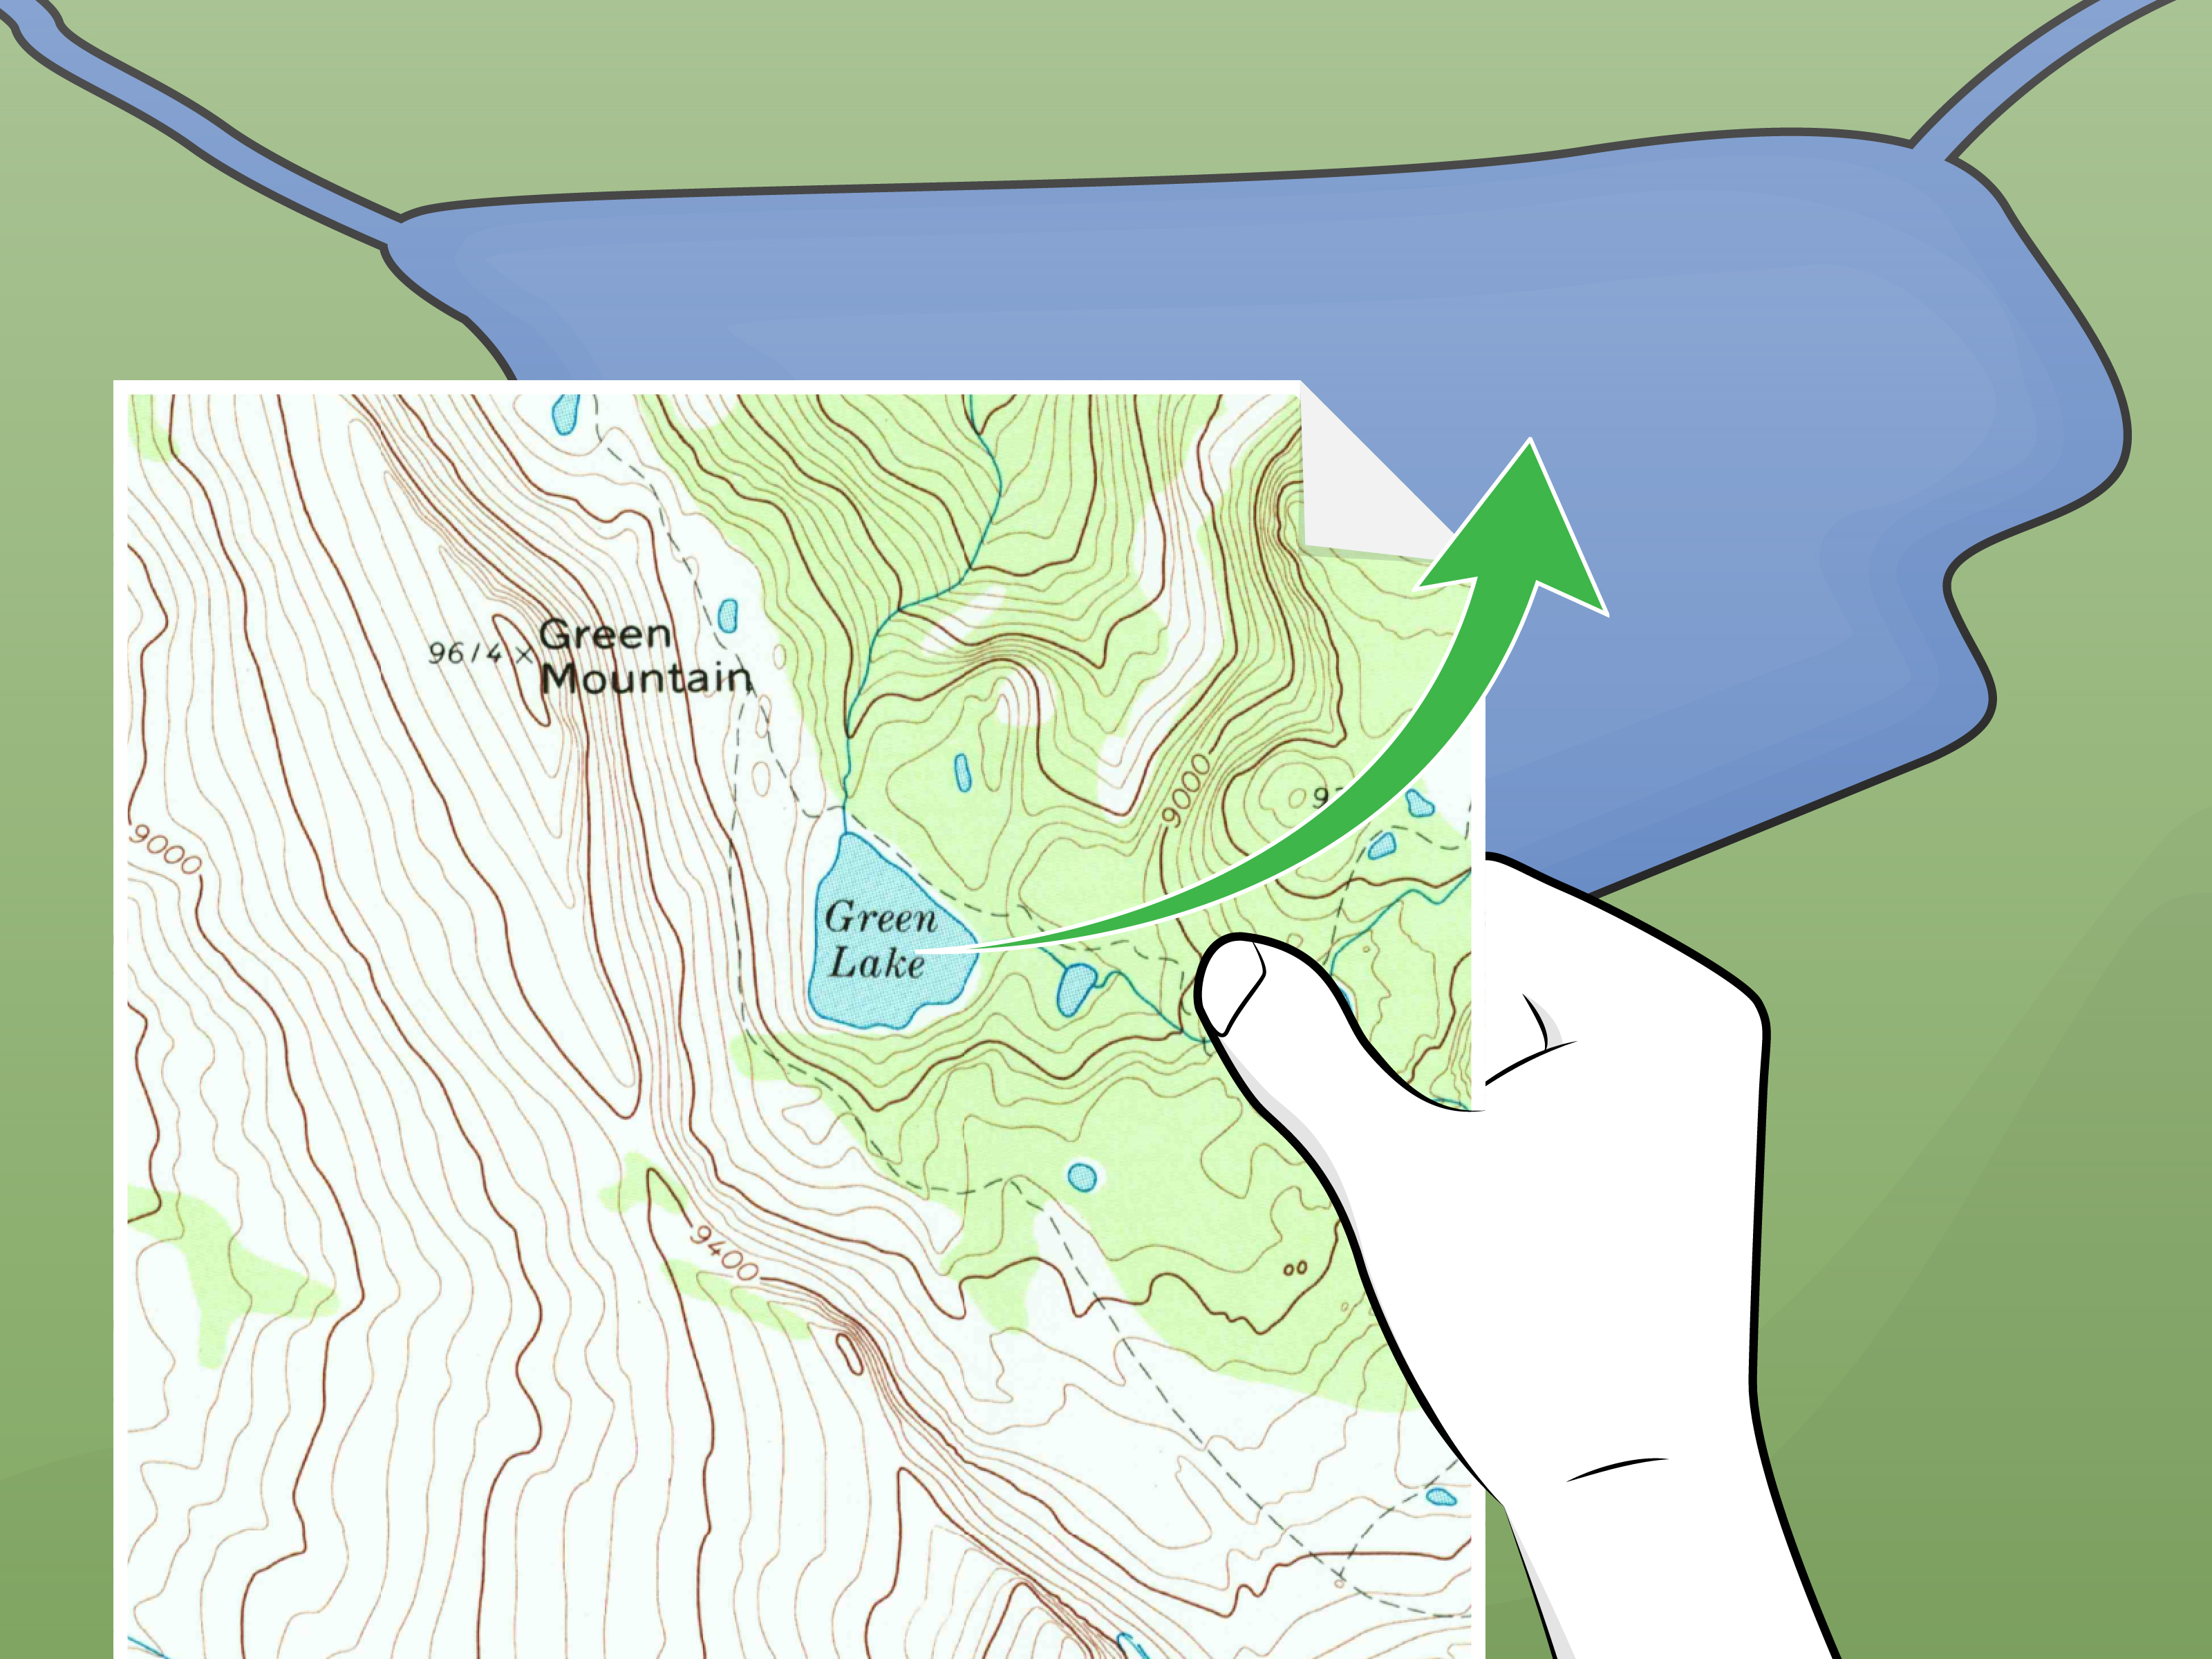 how to read a topographic map pdf